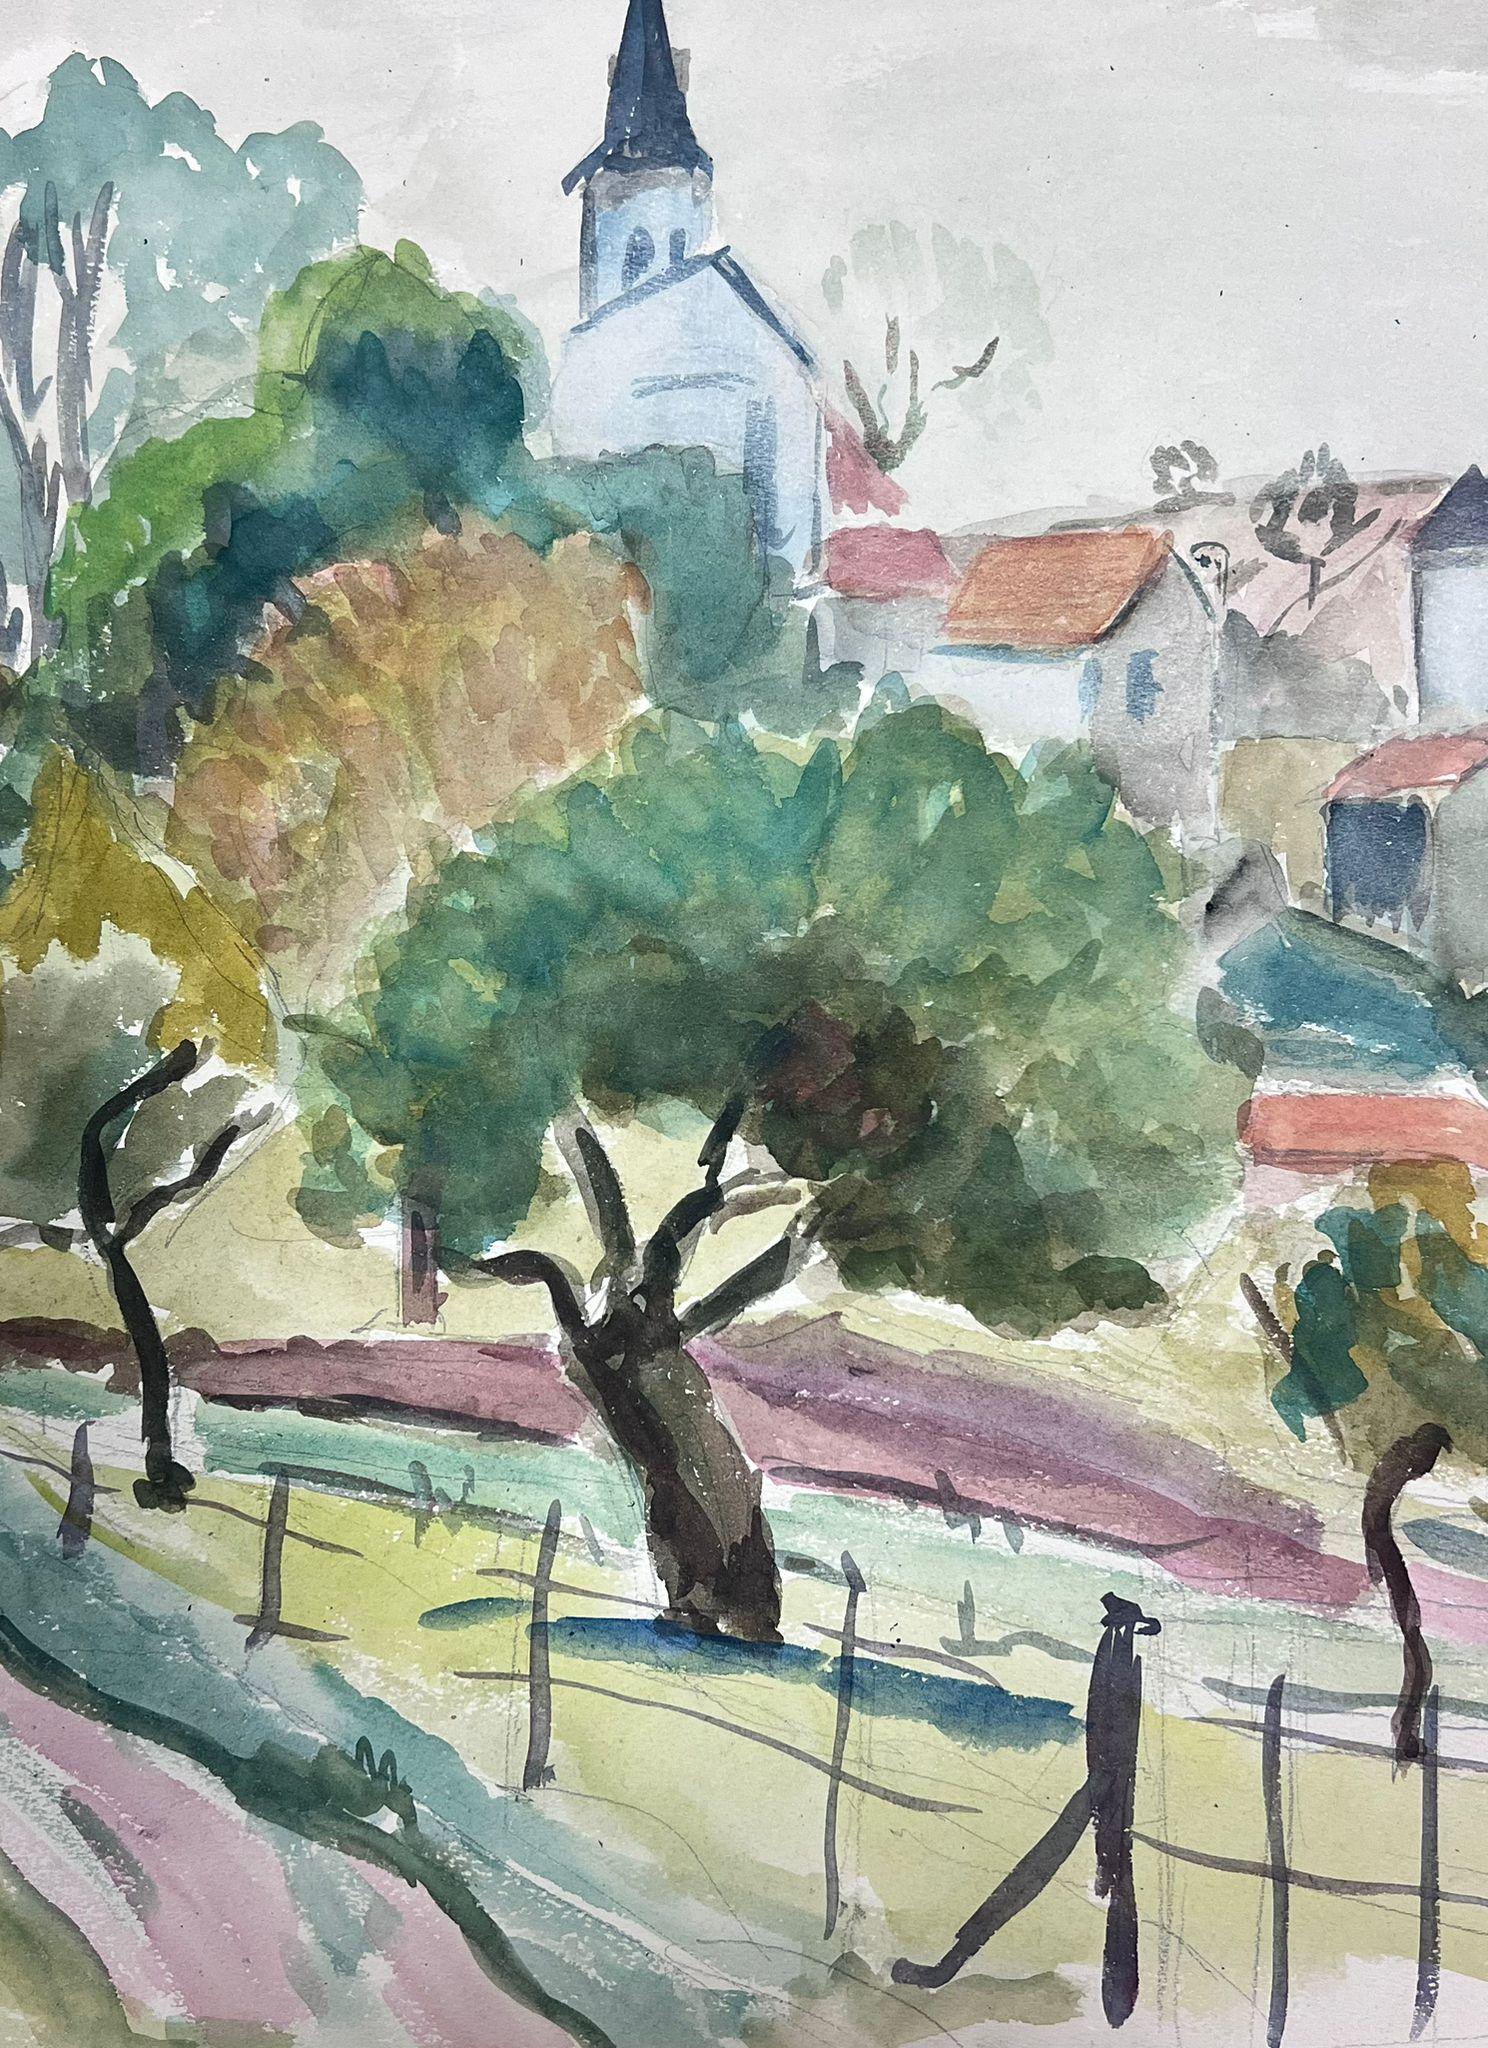 French Landscape
by Guy Nicod
(French 1923 - 2021)
watercolour on artist paper, unframed
painting : 15 x 17 inches
provenance: artists estate, France
condition: very good and sound condition